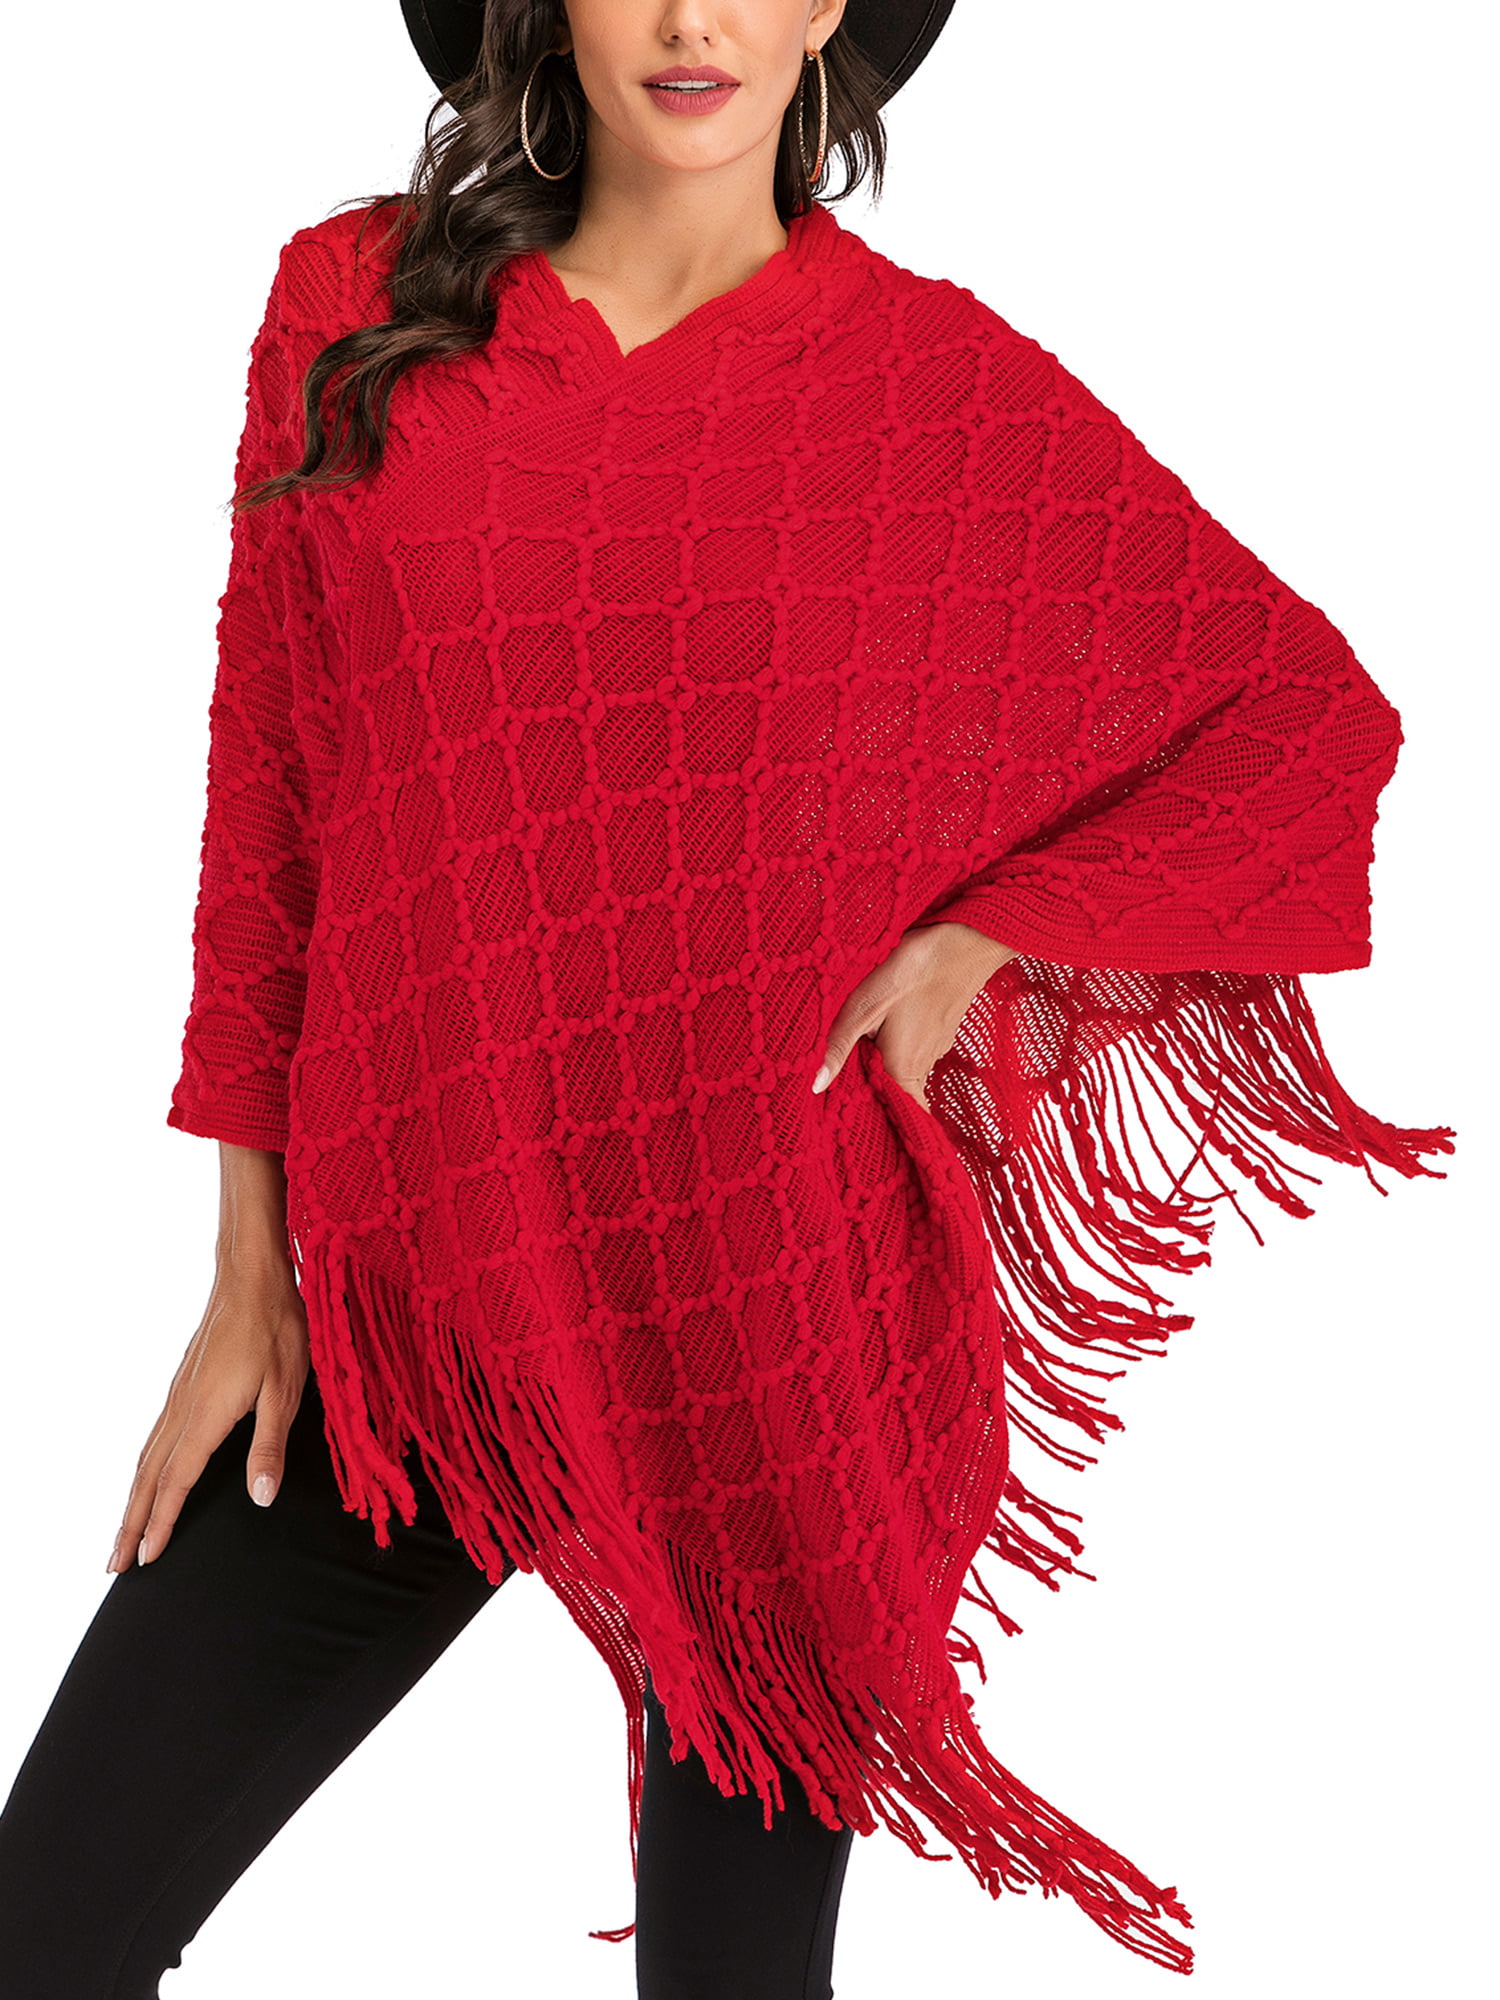 Knitted adult poncho,one size,Asymmetric Adult Poncho